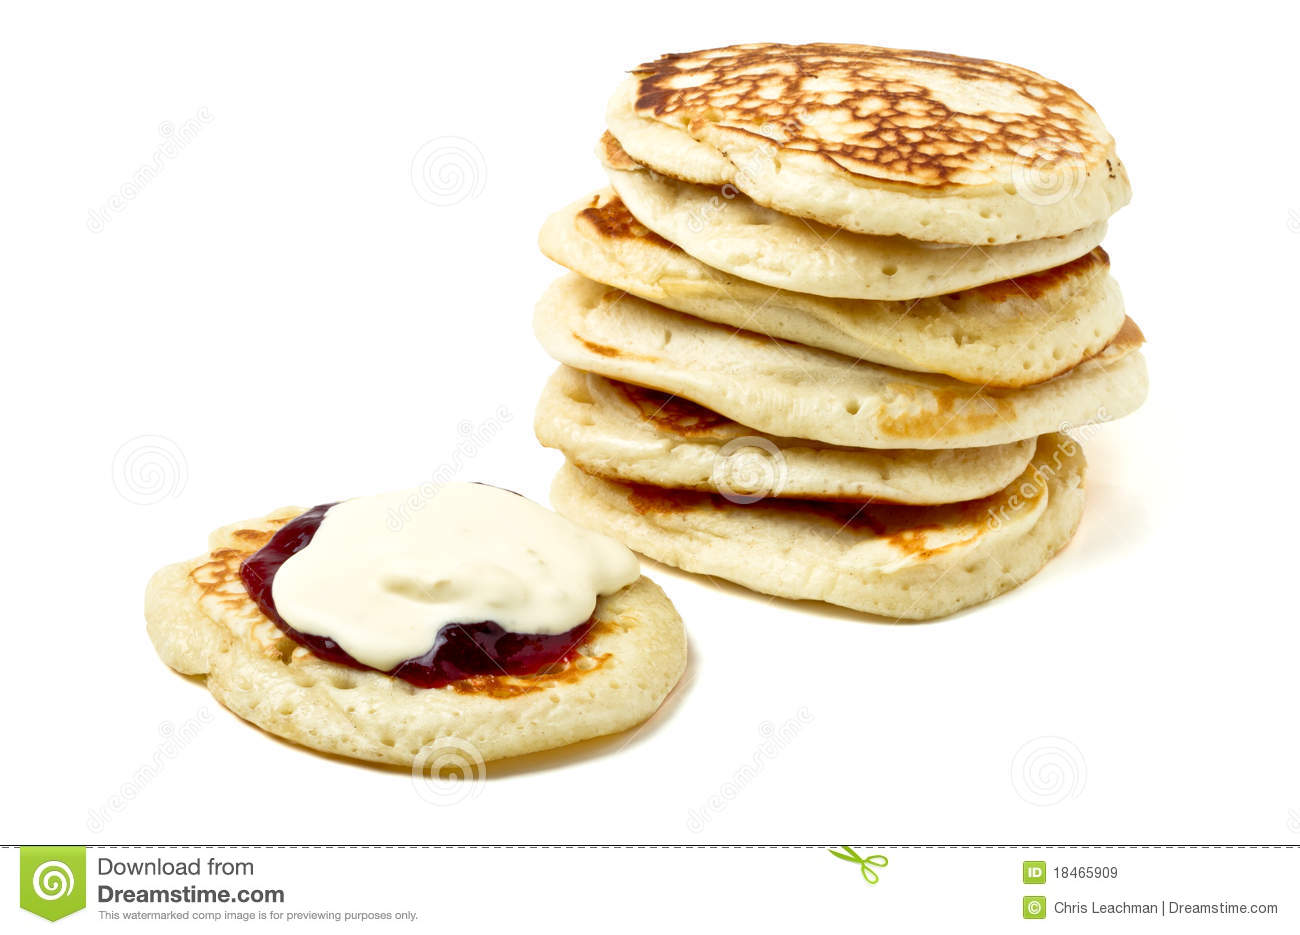 Homemade Drop Scones Or Pancakes With Clotted Cream And Jam